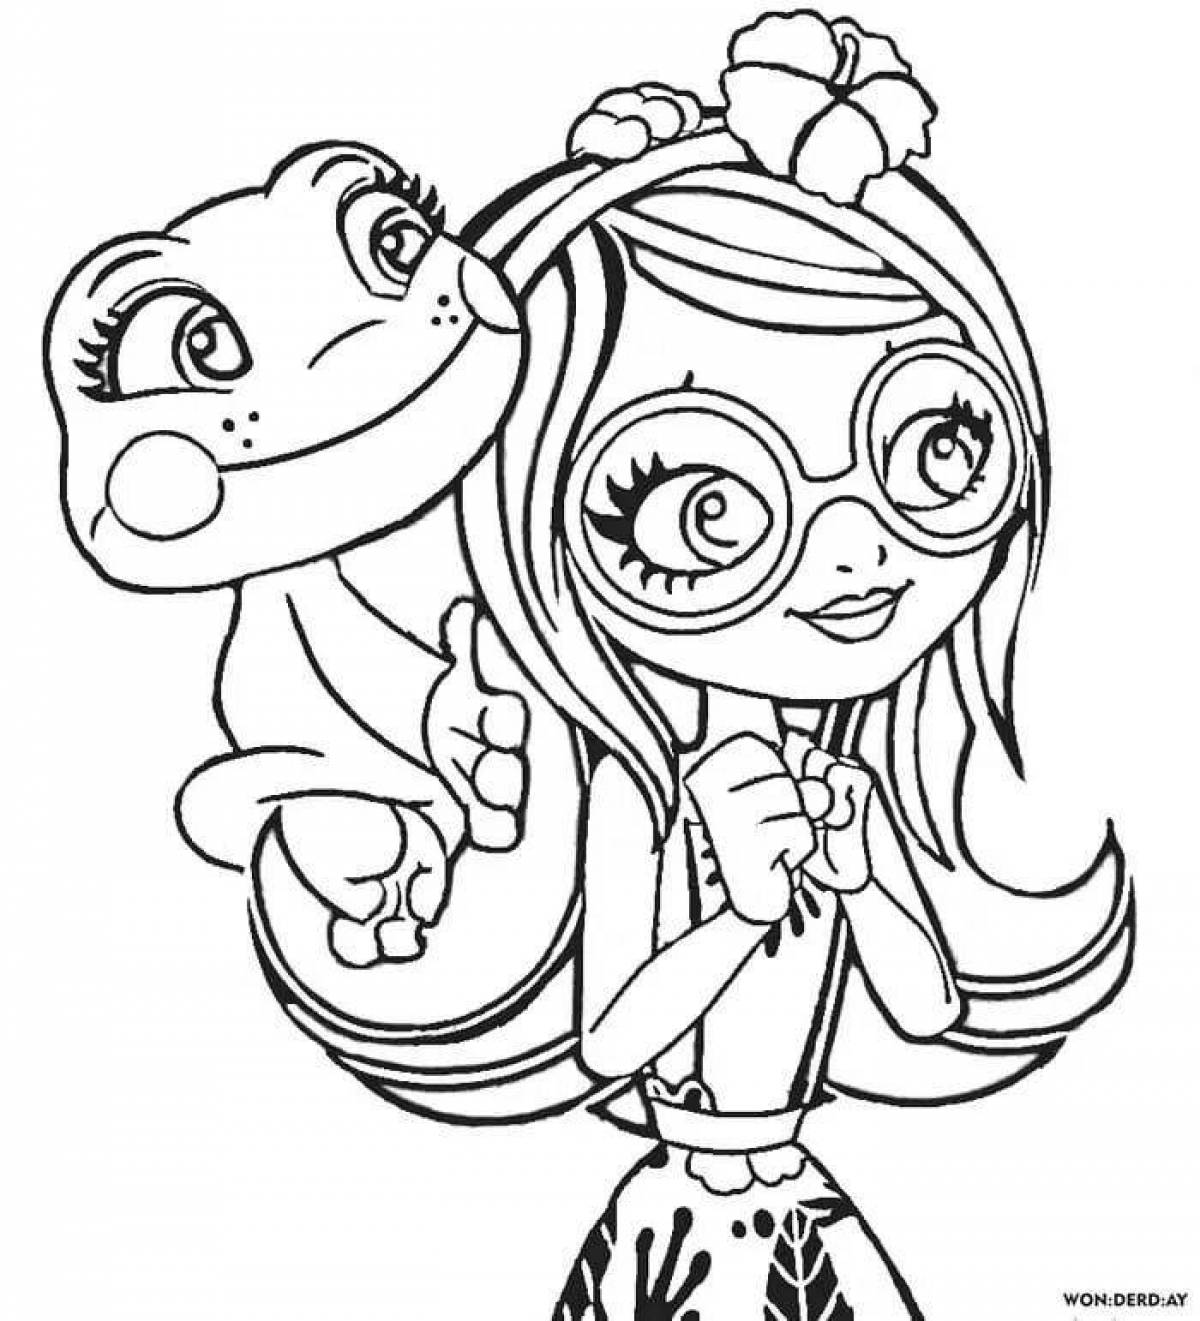 Dazzling enchenchimals coloring pages